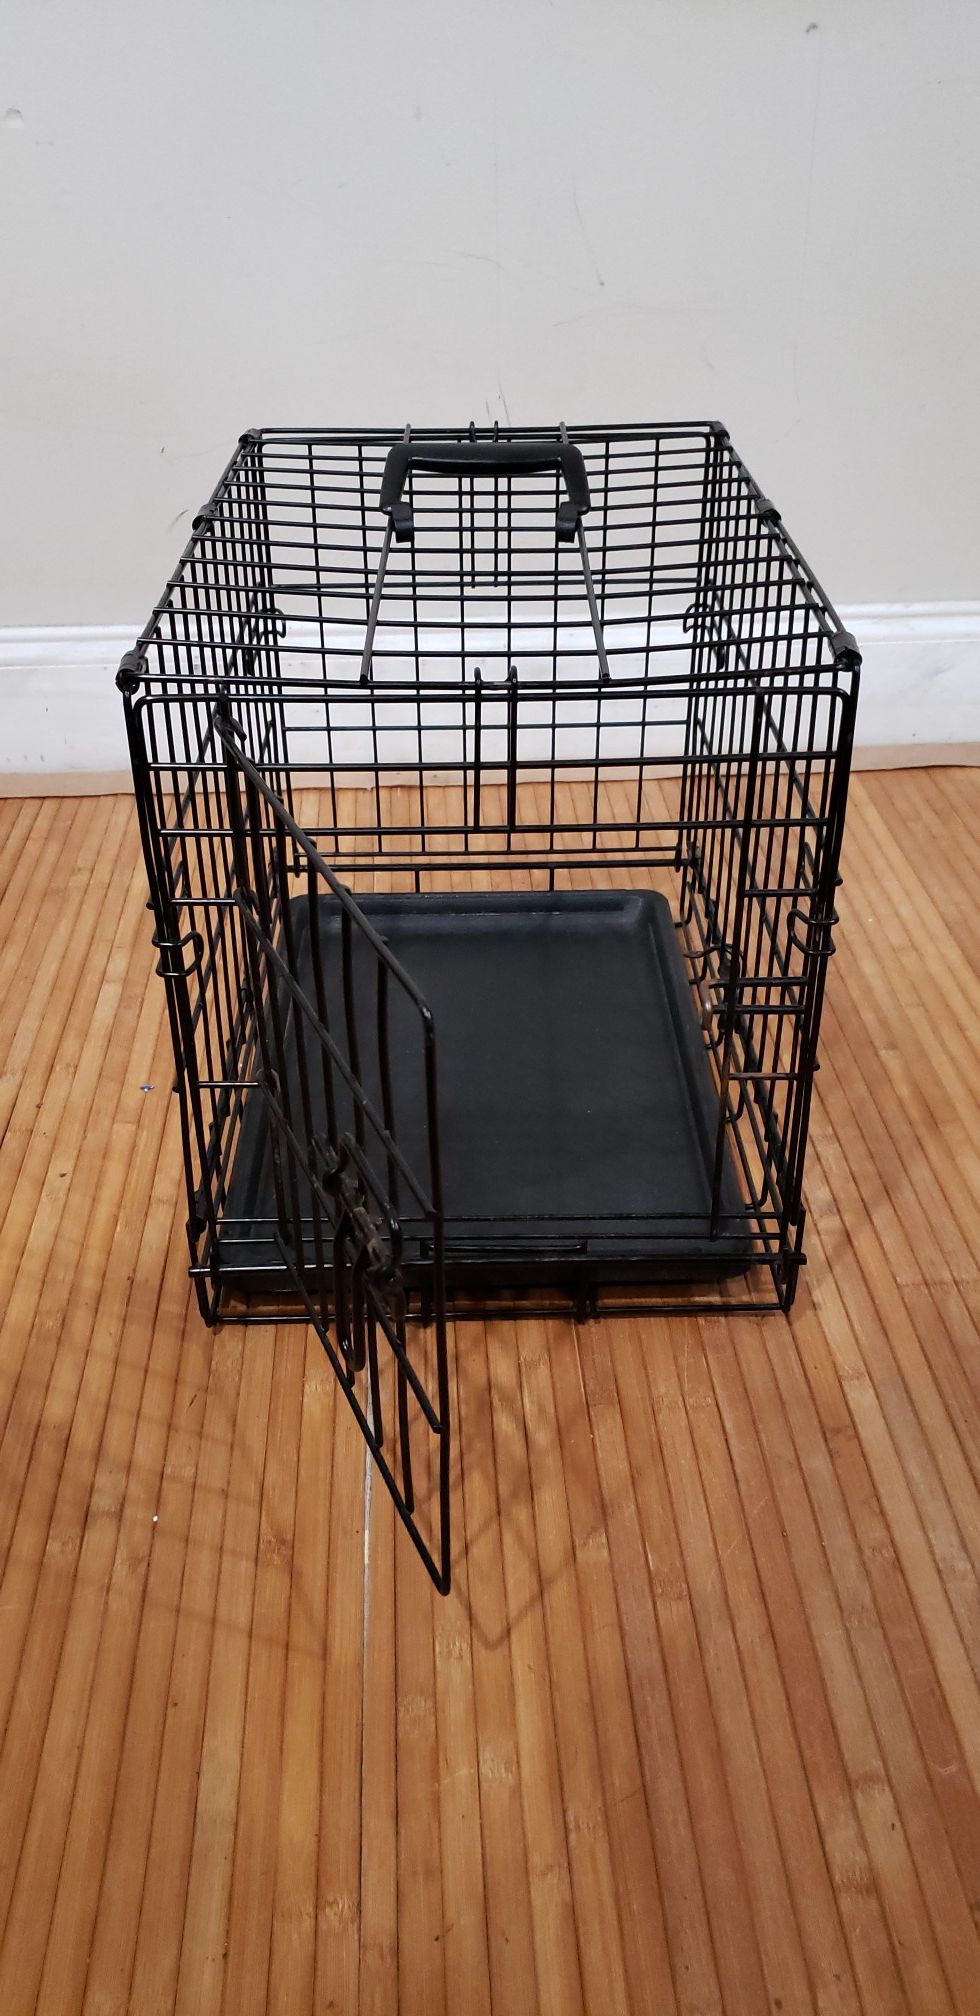 XS Dog Crate - Toy Dog Breed/Puppy 12x18x14